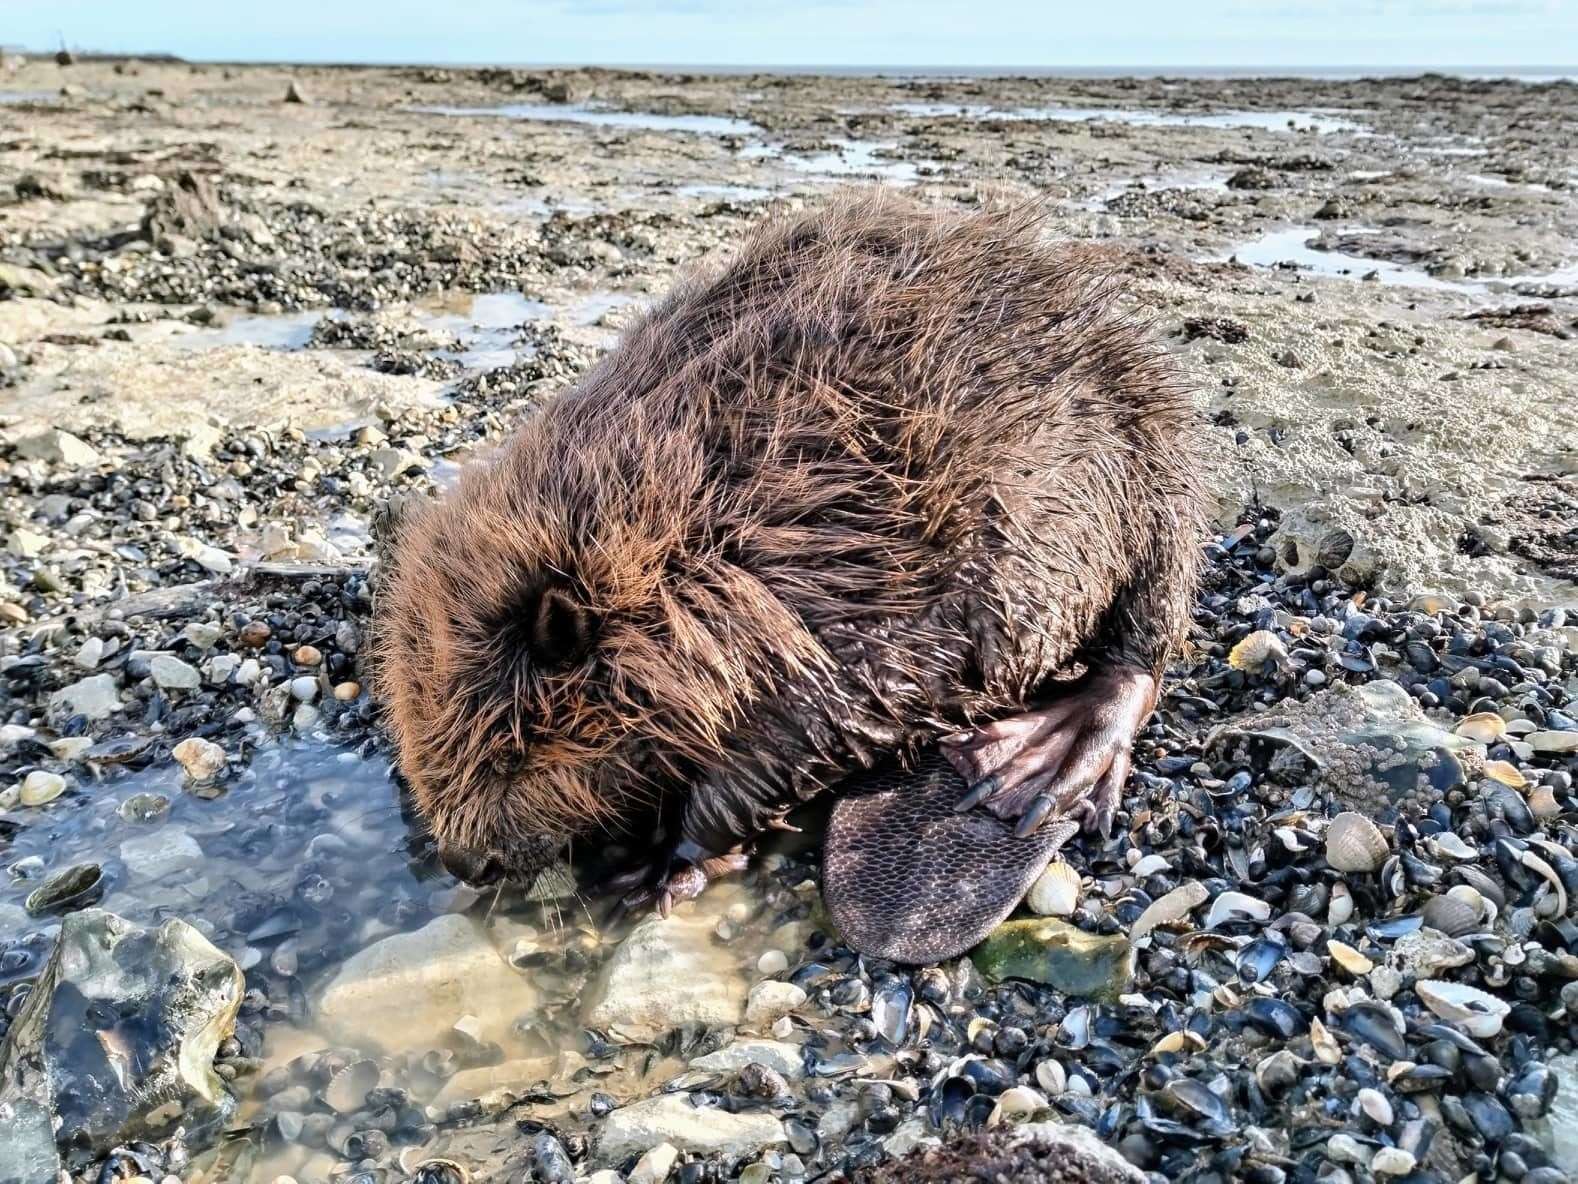 One of the sick beavers found in Thanet, which later died. Picture: Nik Mitchell